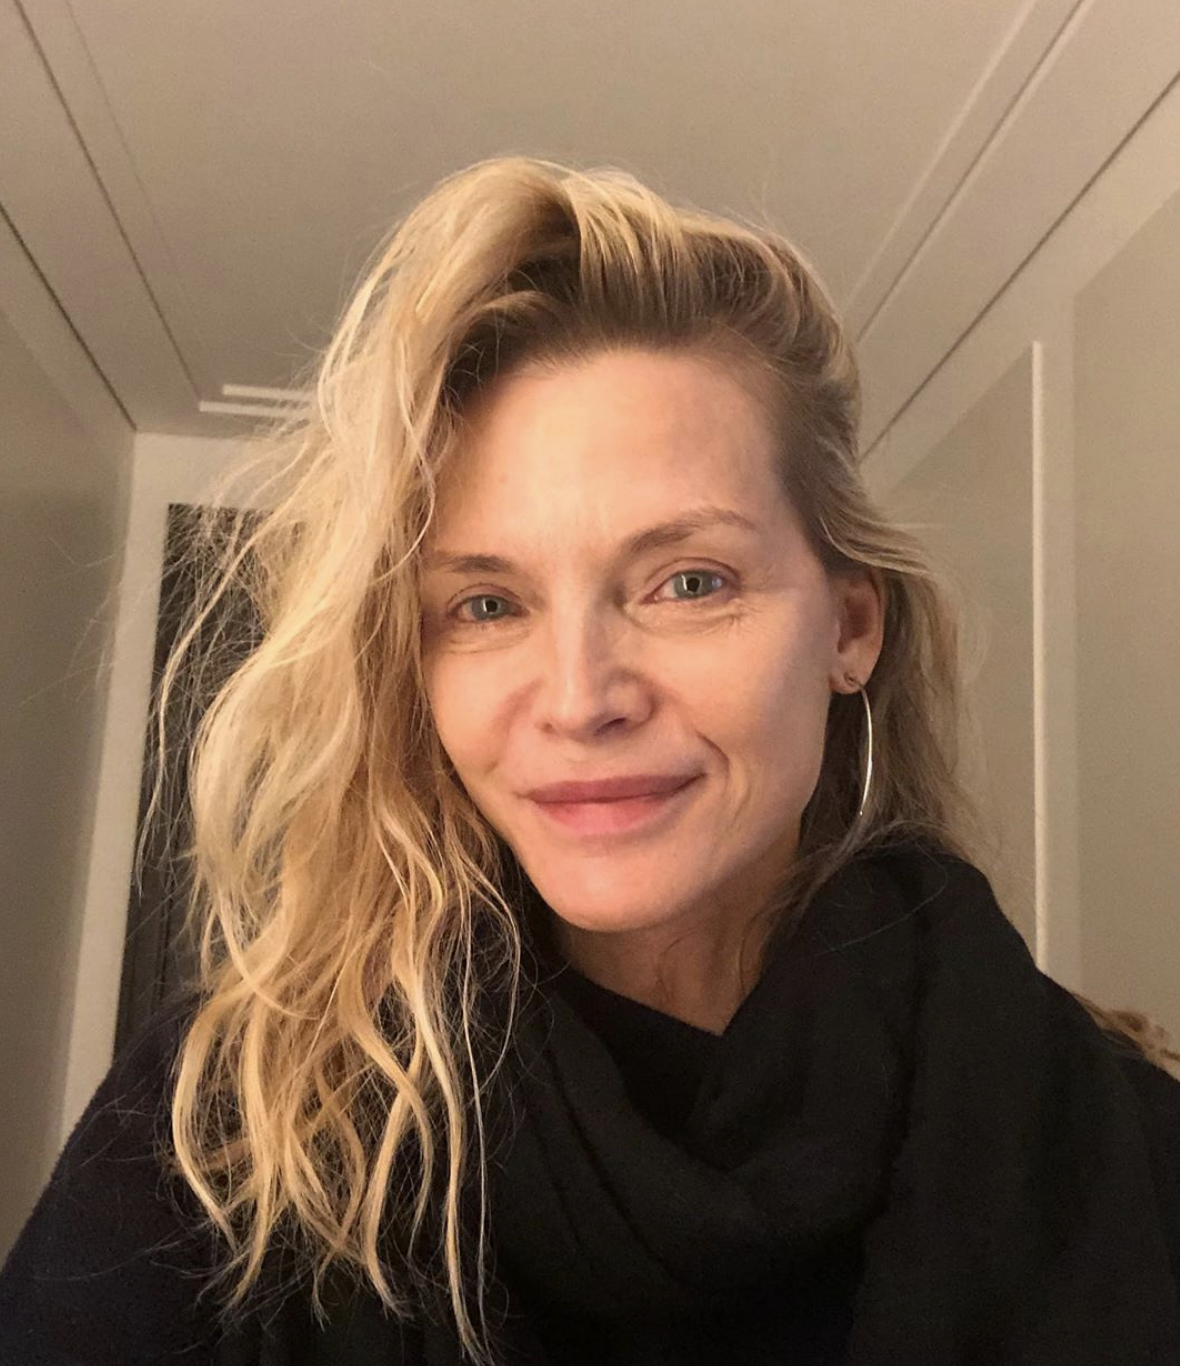 without makeup in 2019 | Gallery | Wonderwall.com